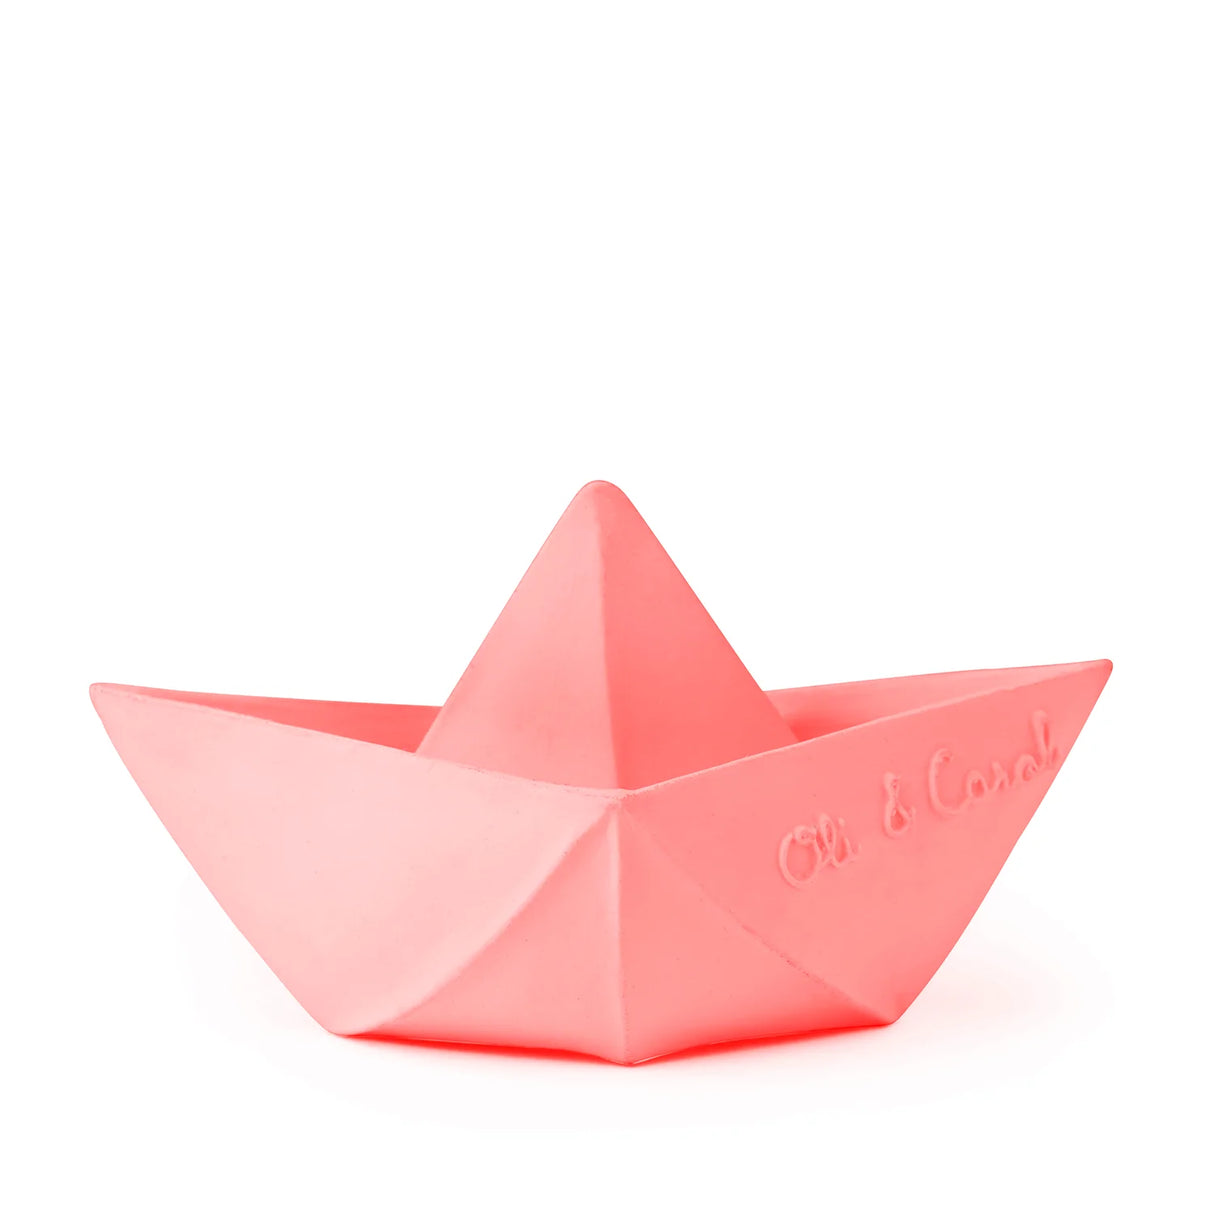 Origami Boat - Pink